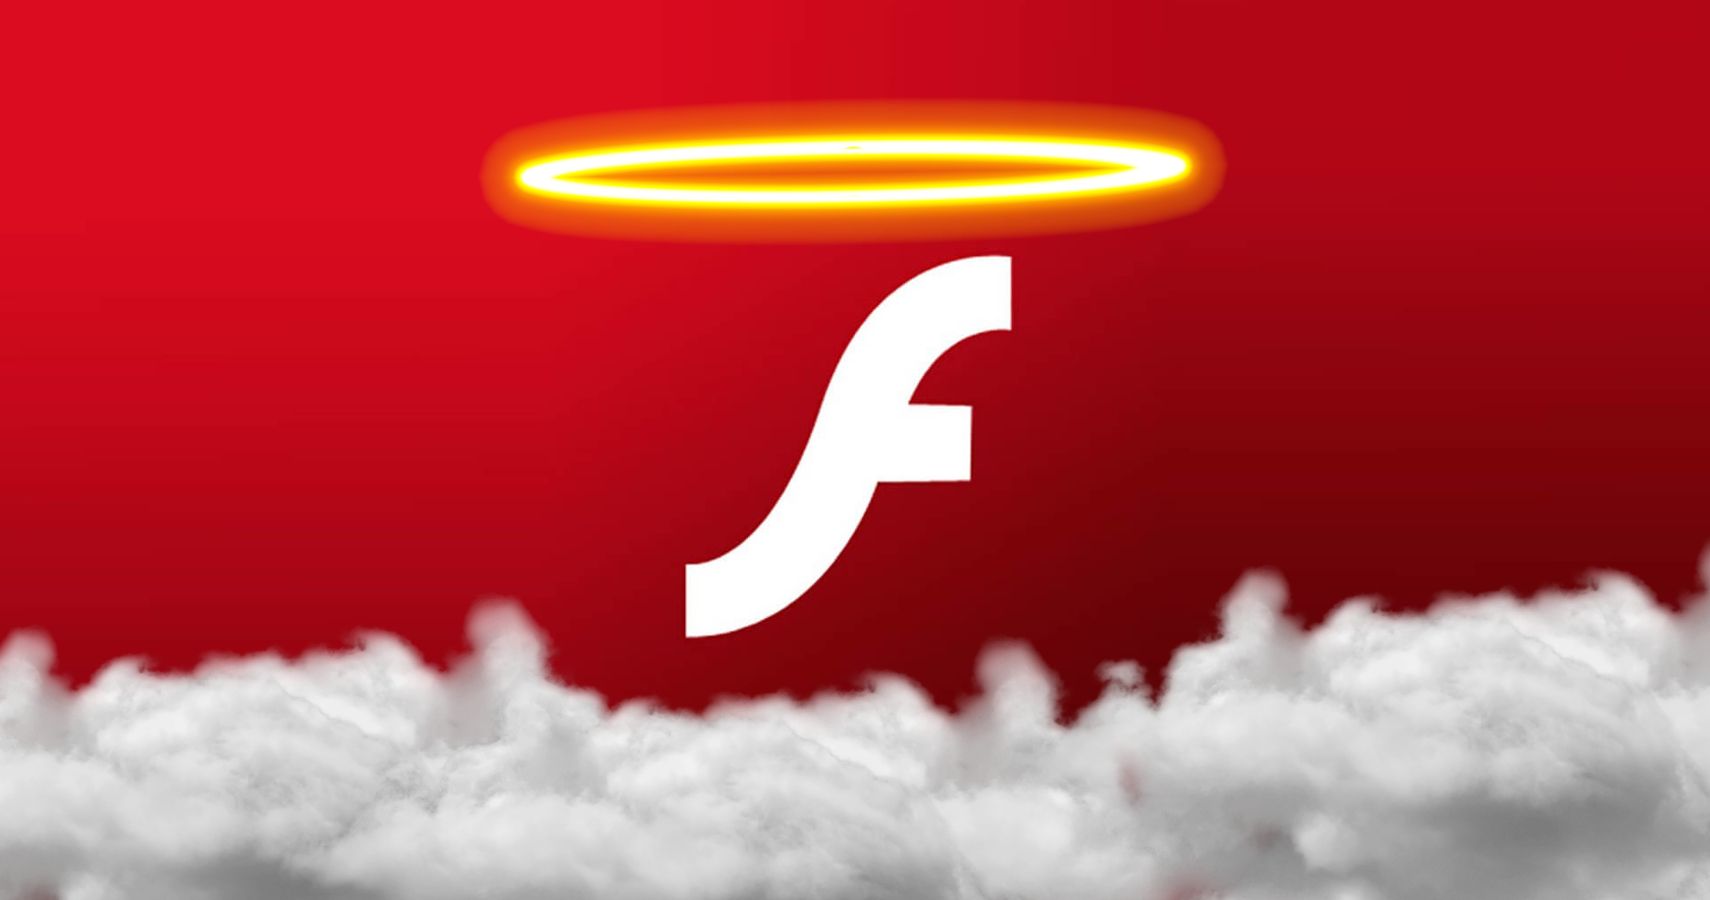 How to play Flash games after Adobe 'killed' them forever in 2020